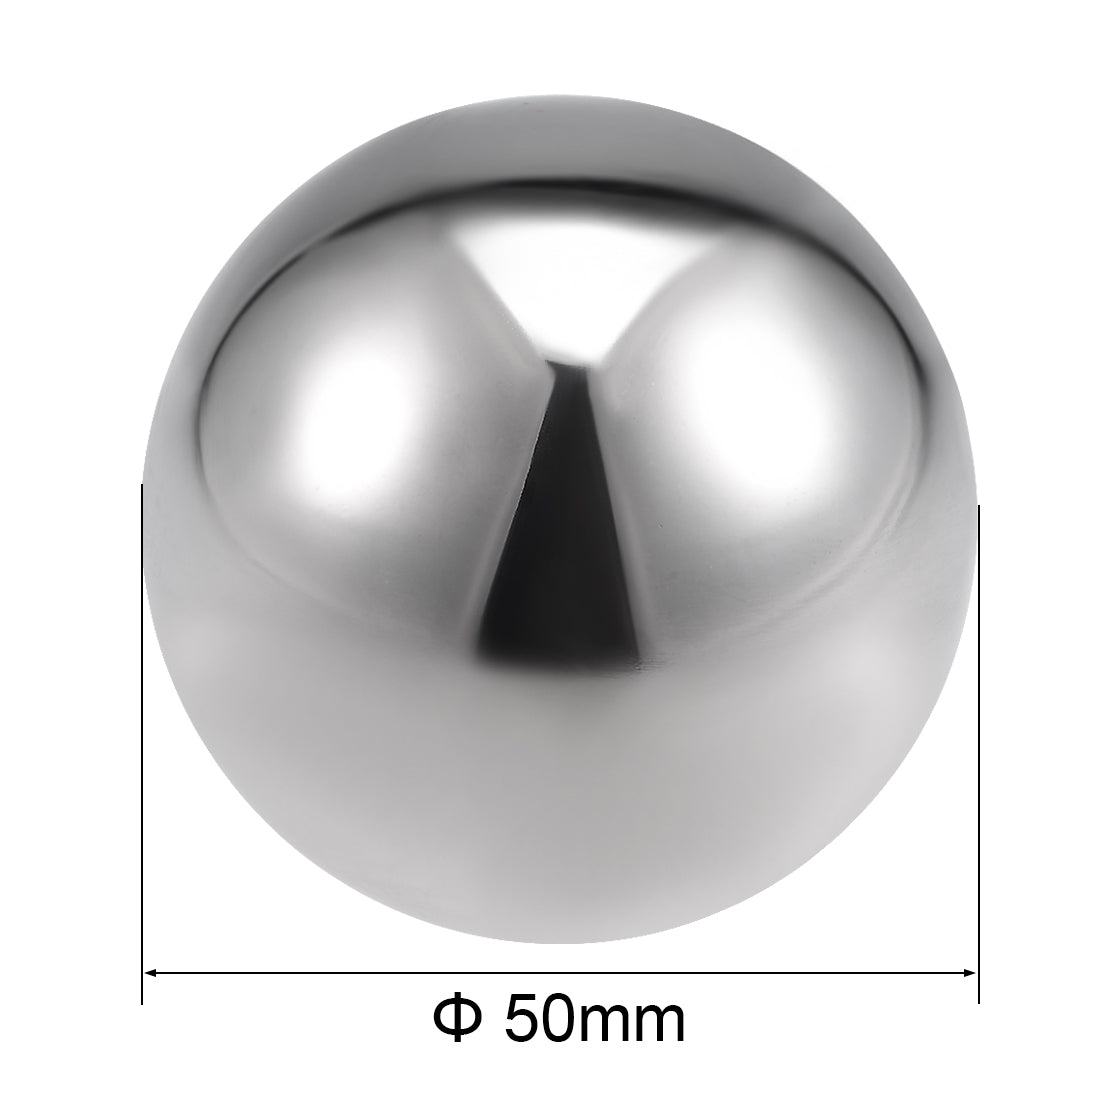 Uxcell Uxcell 41mm(1.61") Dia 304 Stainless Steel Hollow Ball for Home Garden Decoration 16pcs